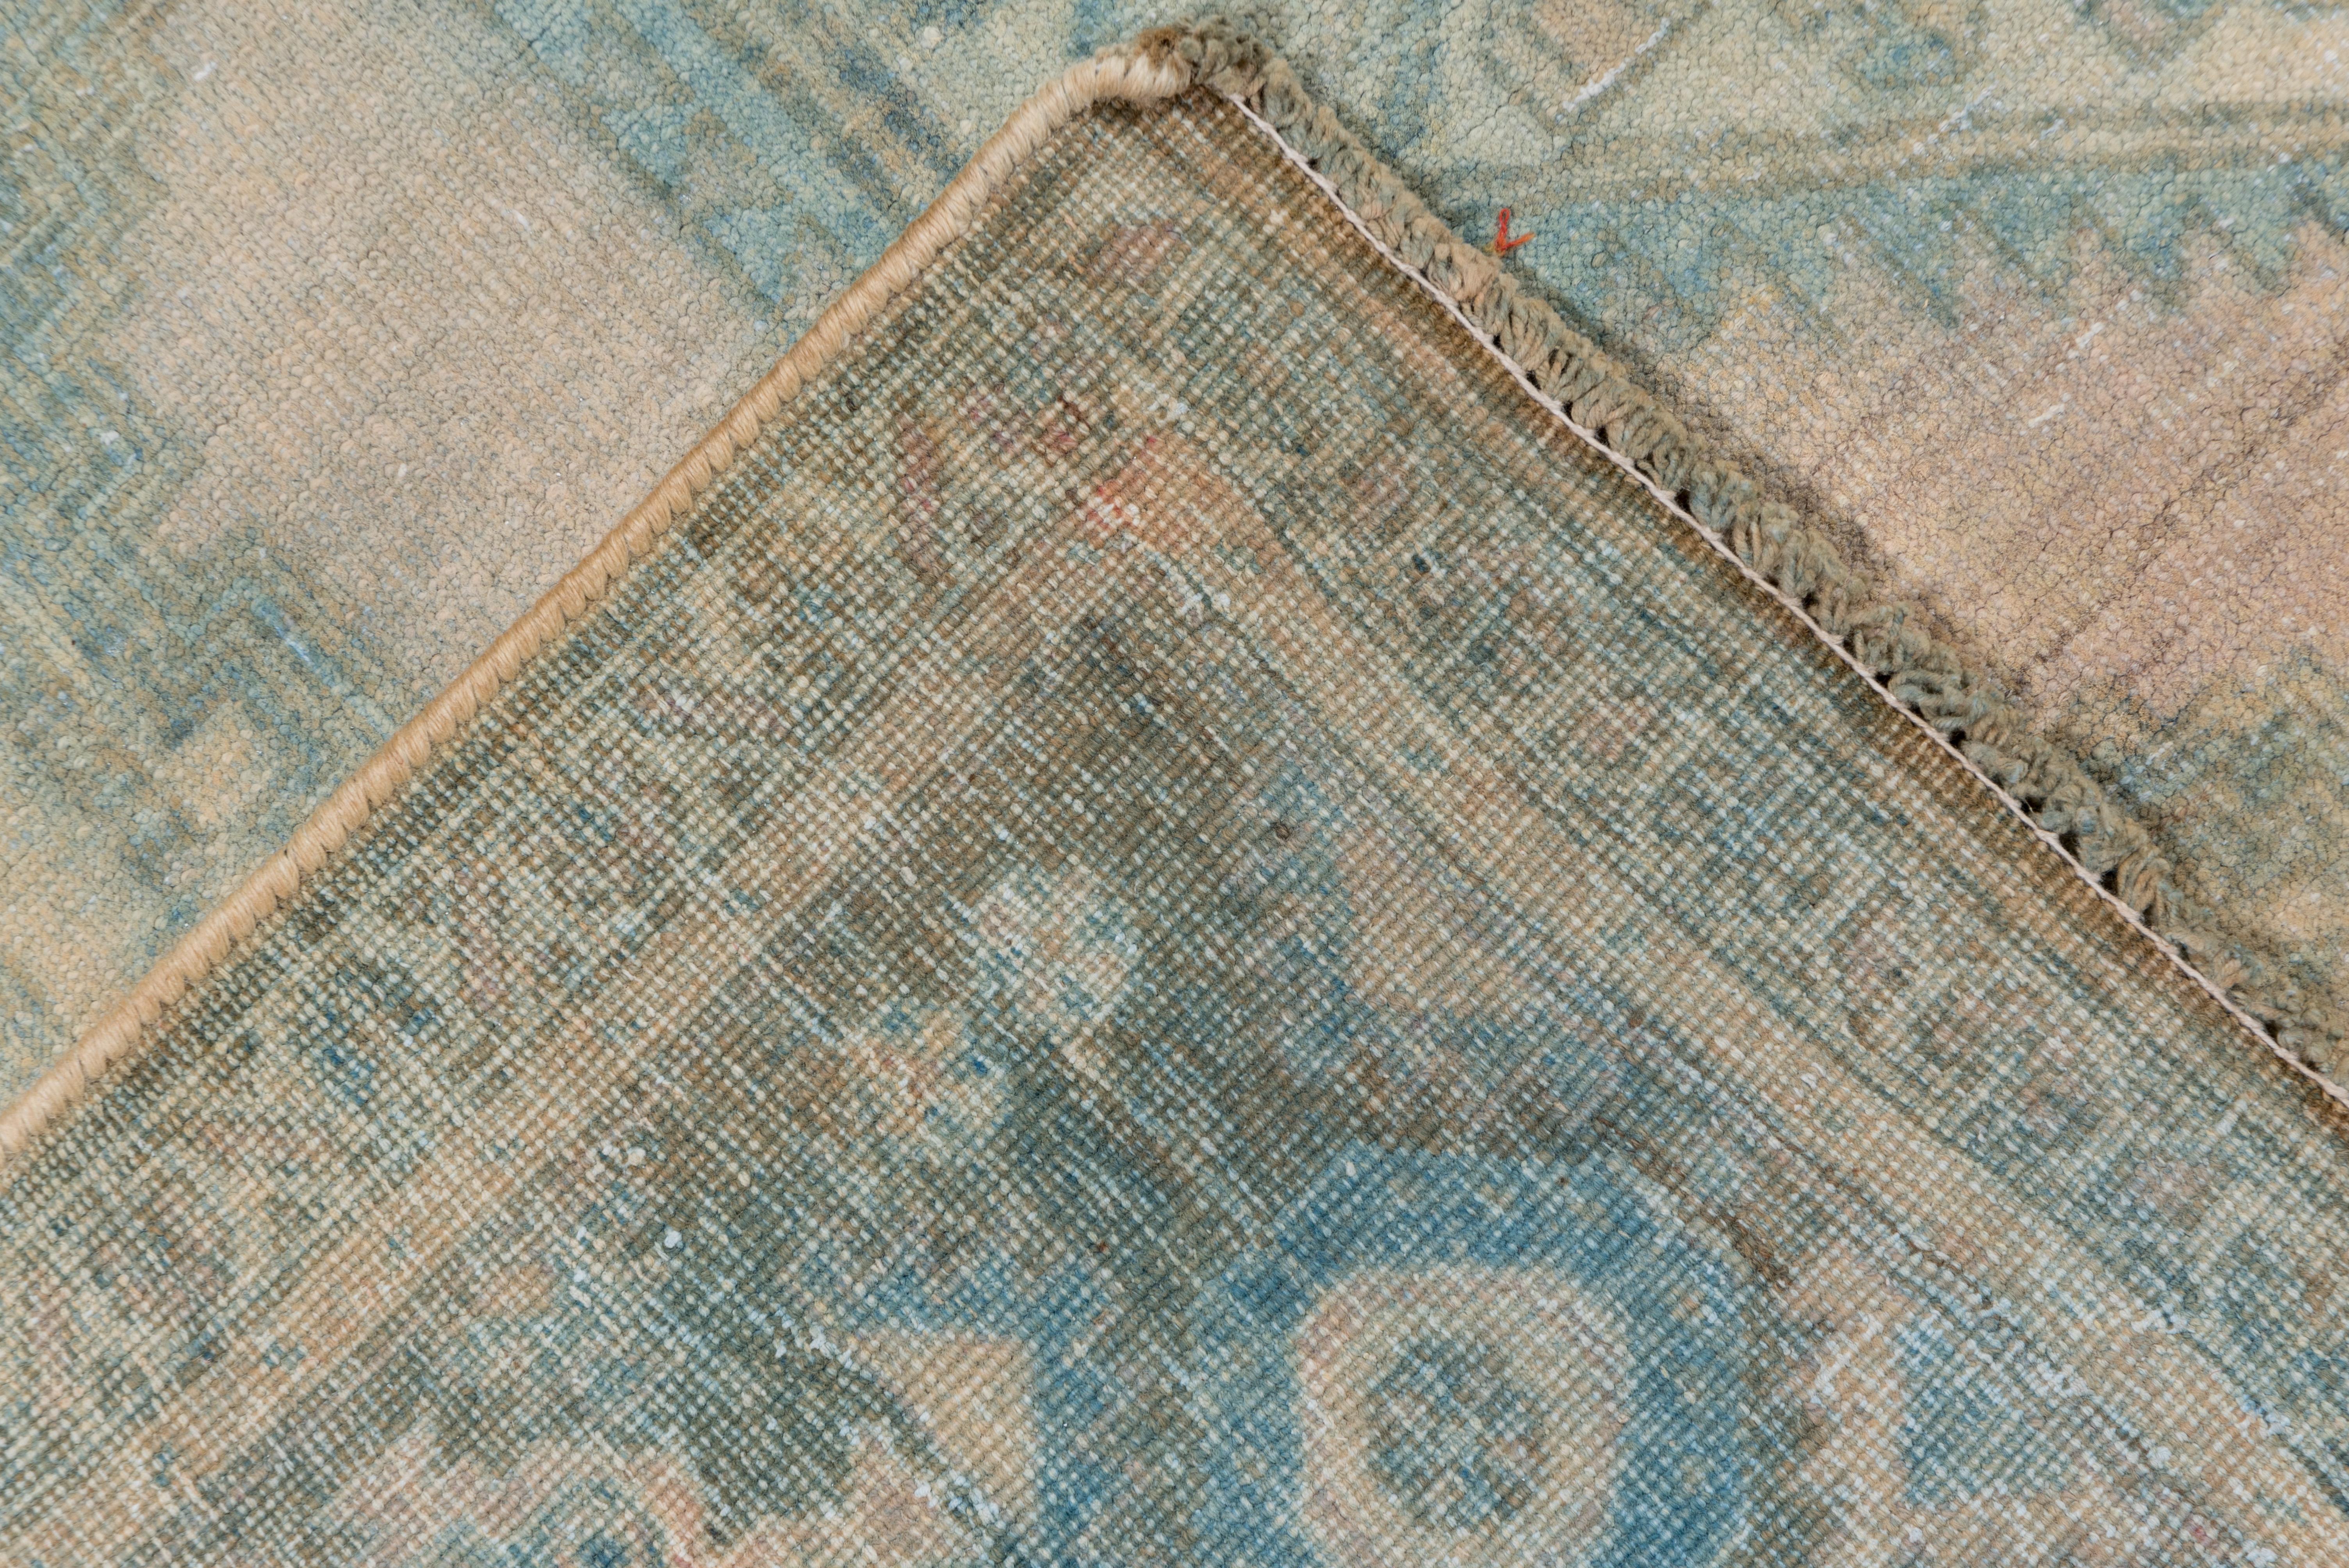 A bold zig-zag sets off the two cream octagons with central squares, on the straw open field. Greenish border with octofoil cartouches, rosettes and half ashiks. Medium tribal weave. From SE Persia. Fair condition with a softer tonality.